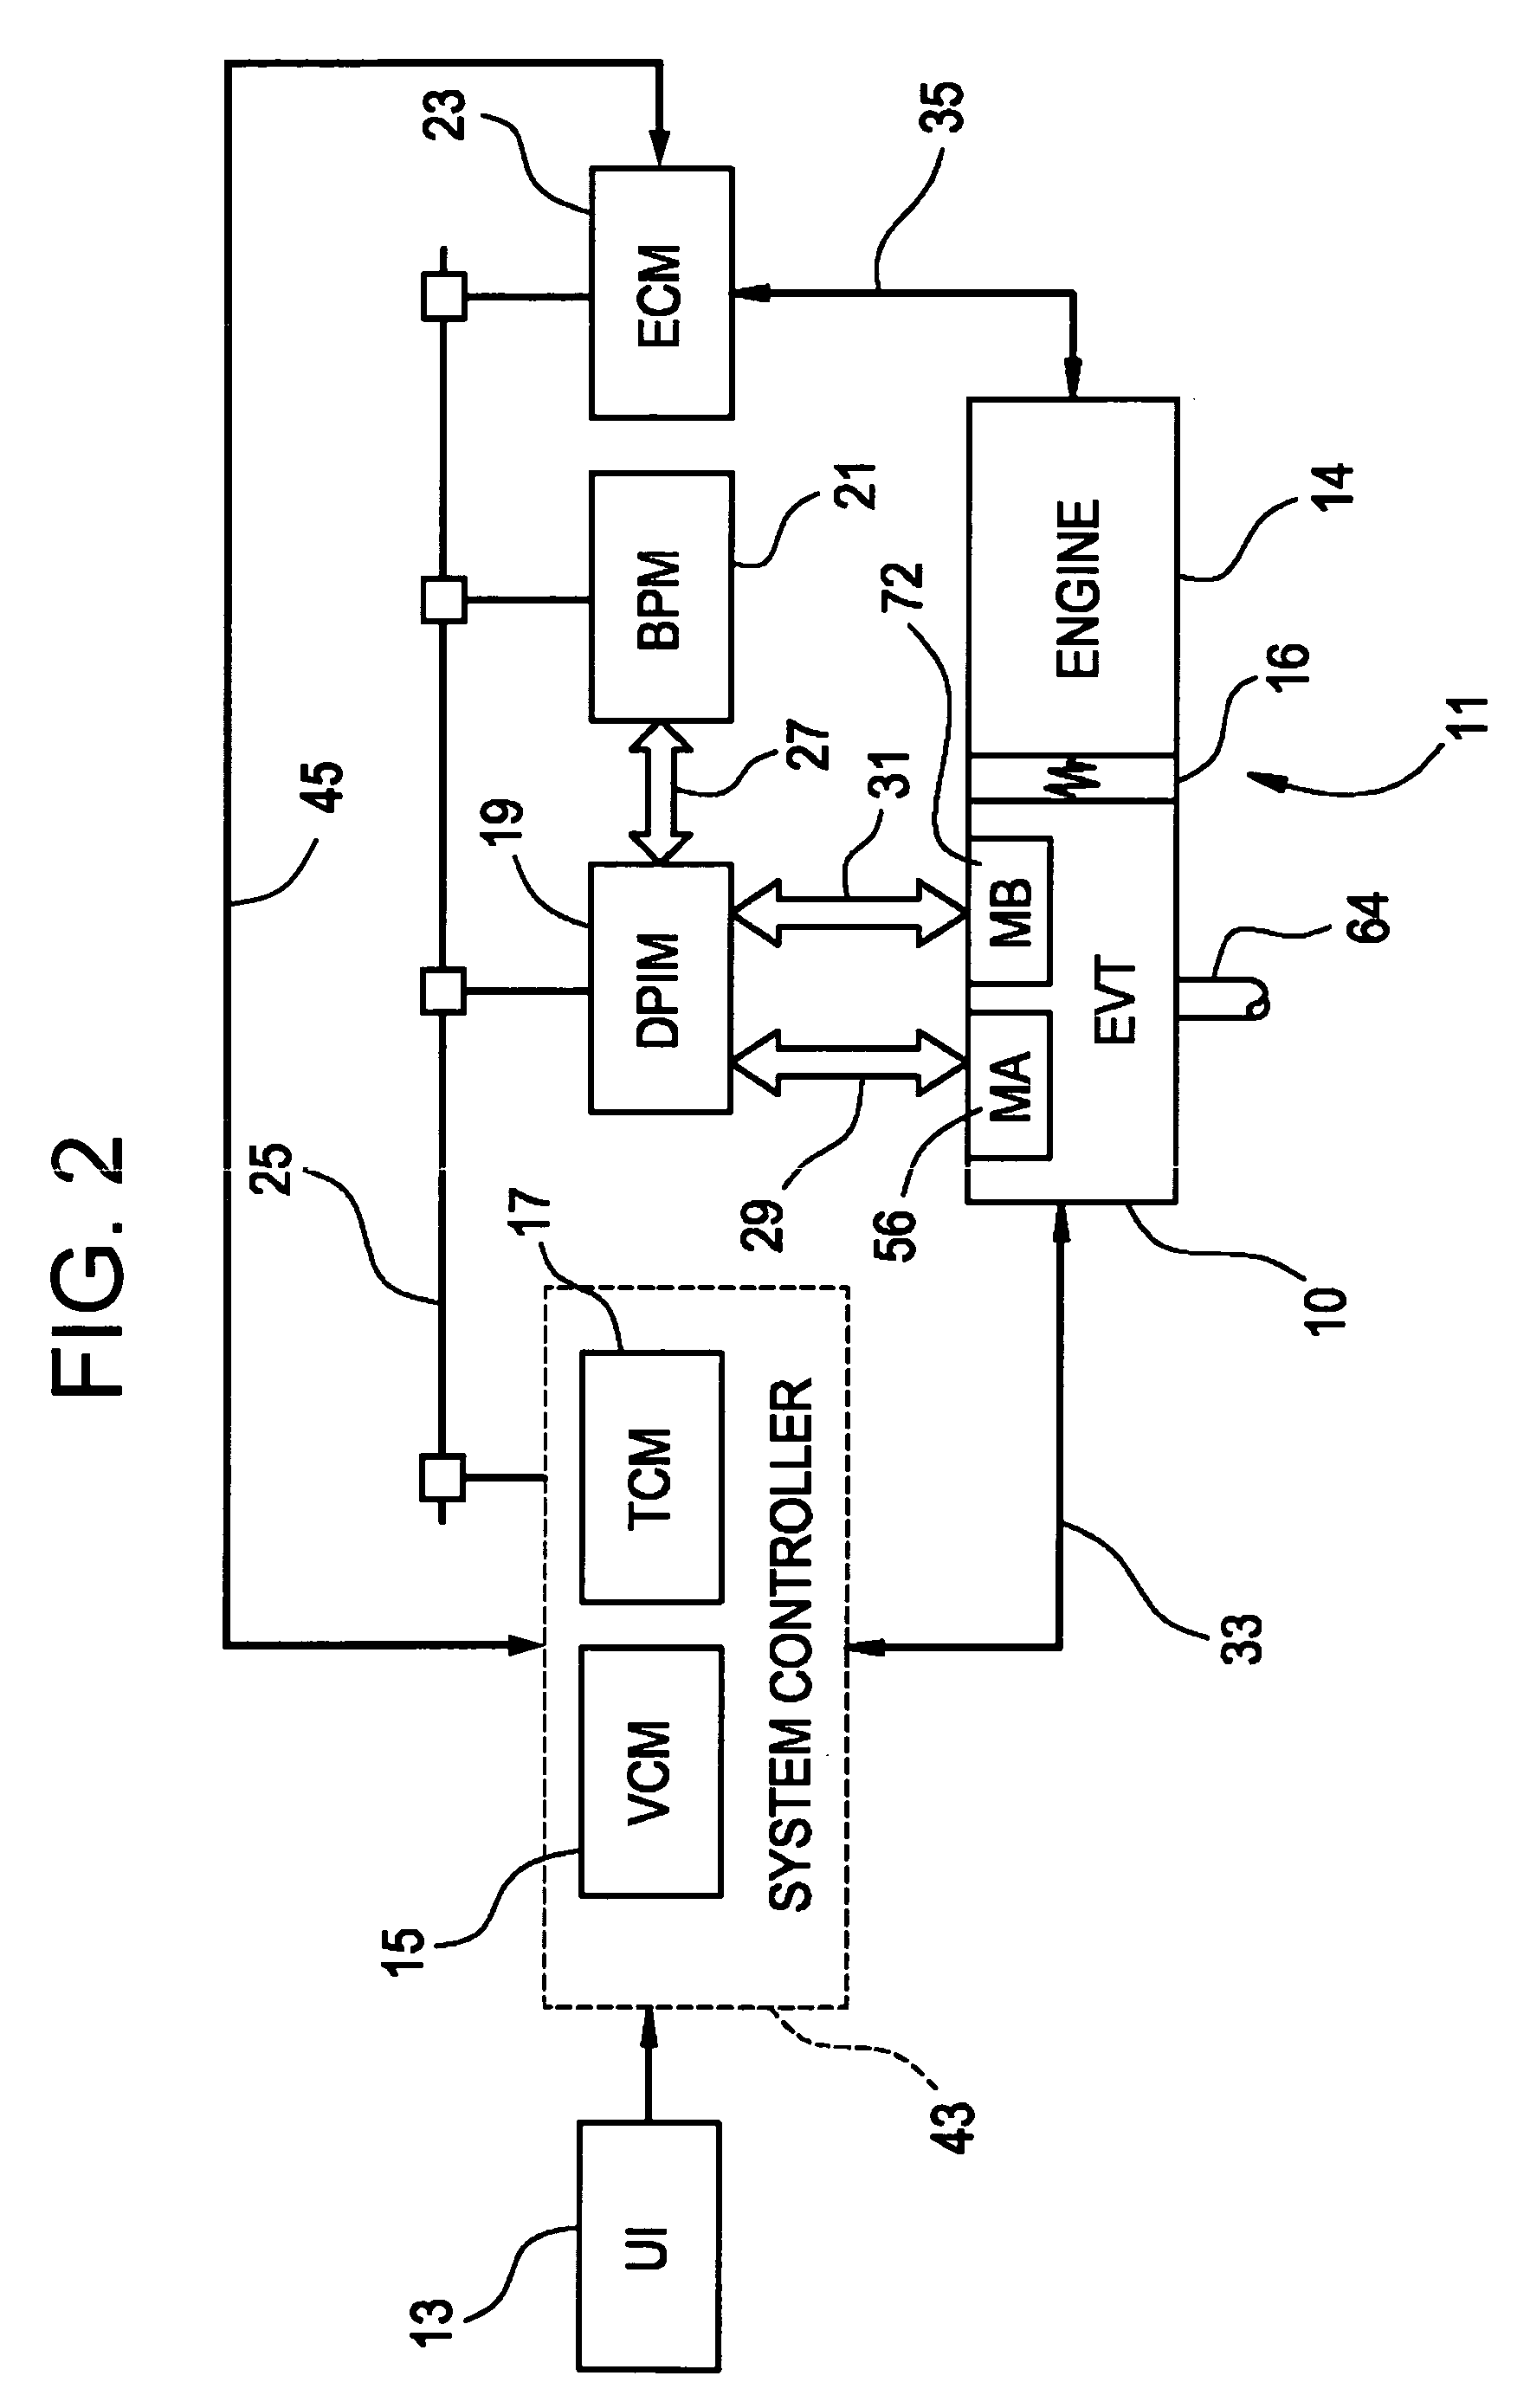 Method for active engine stop of a hybrid electric vehicle